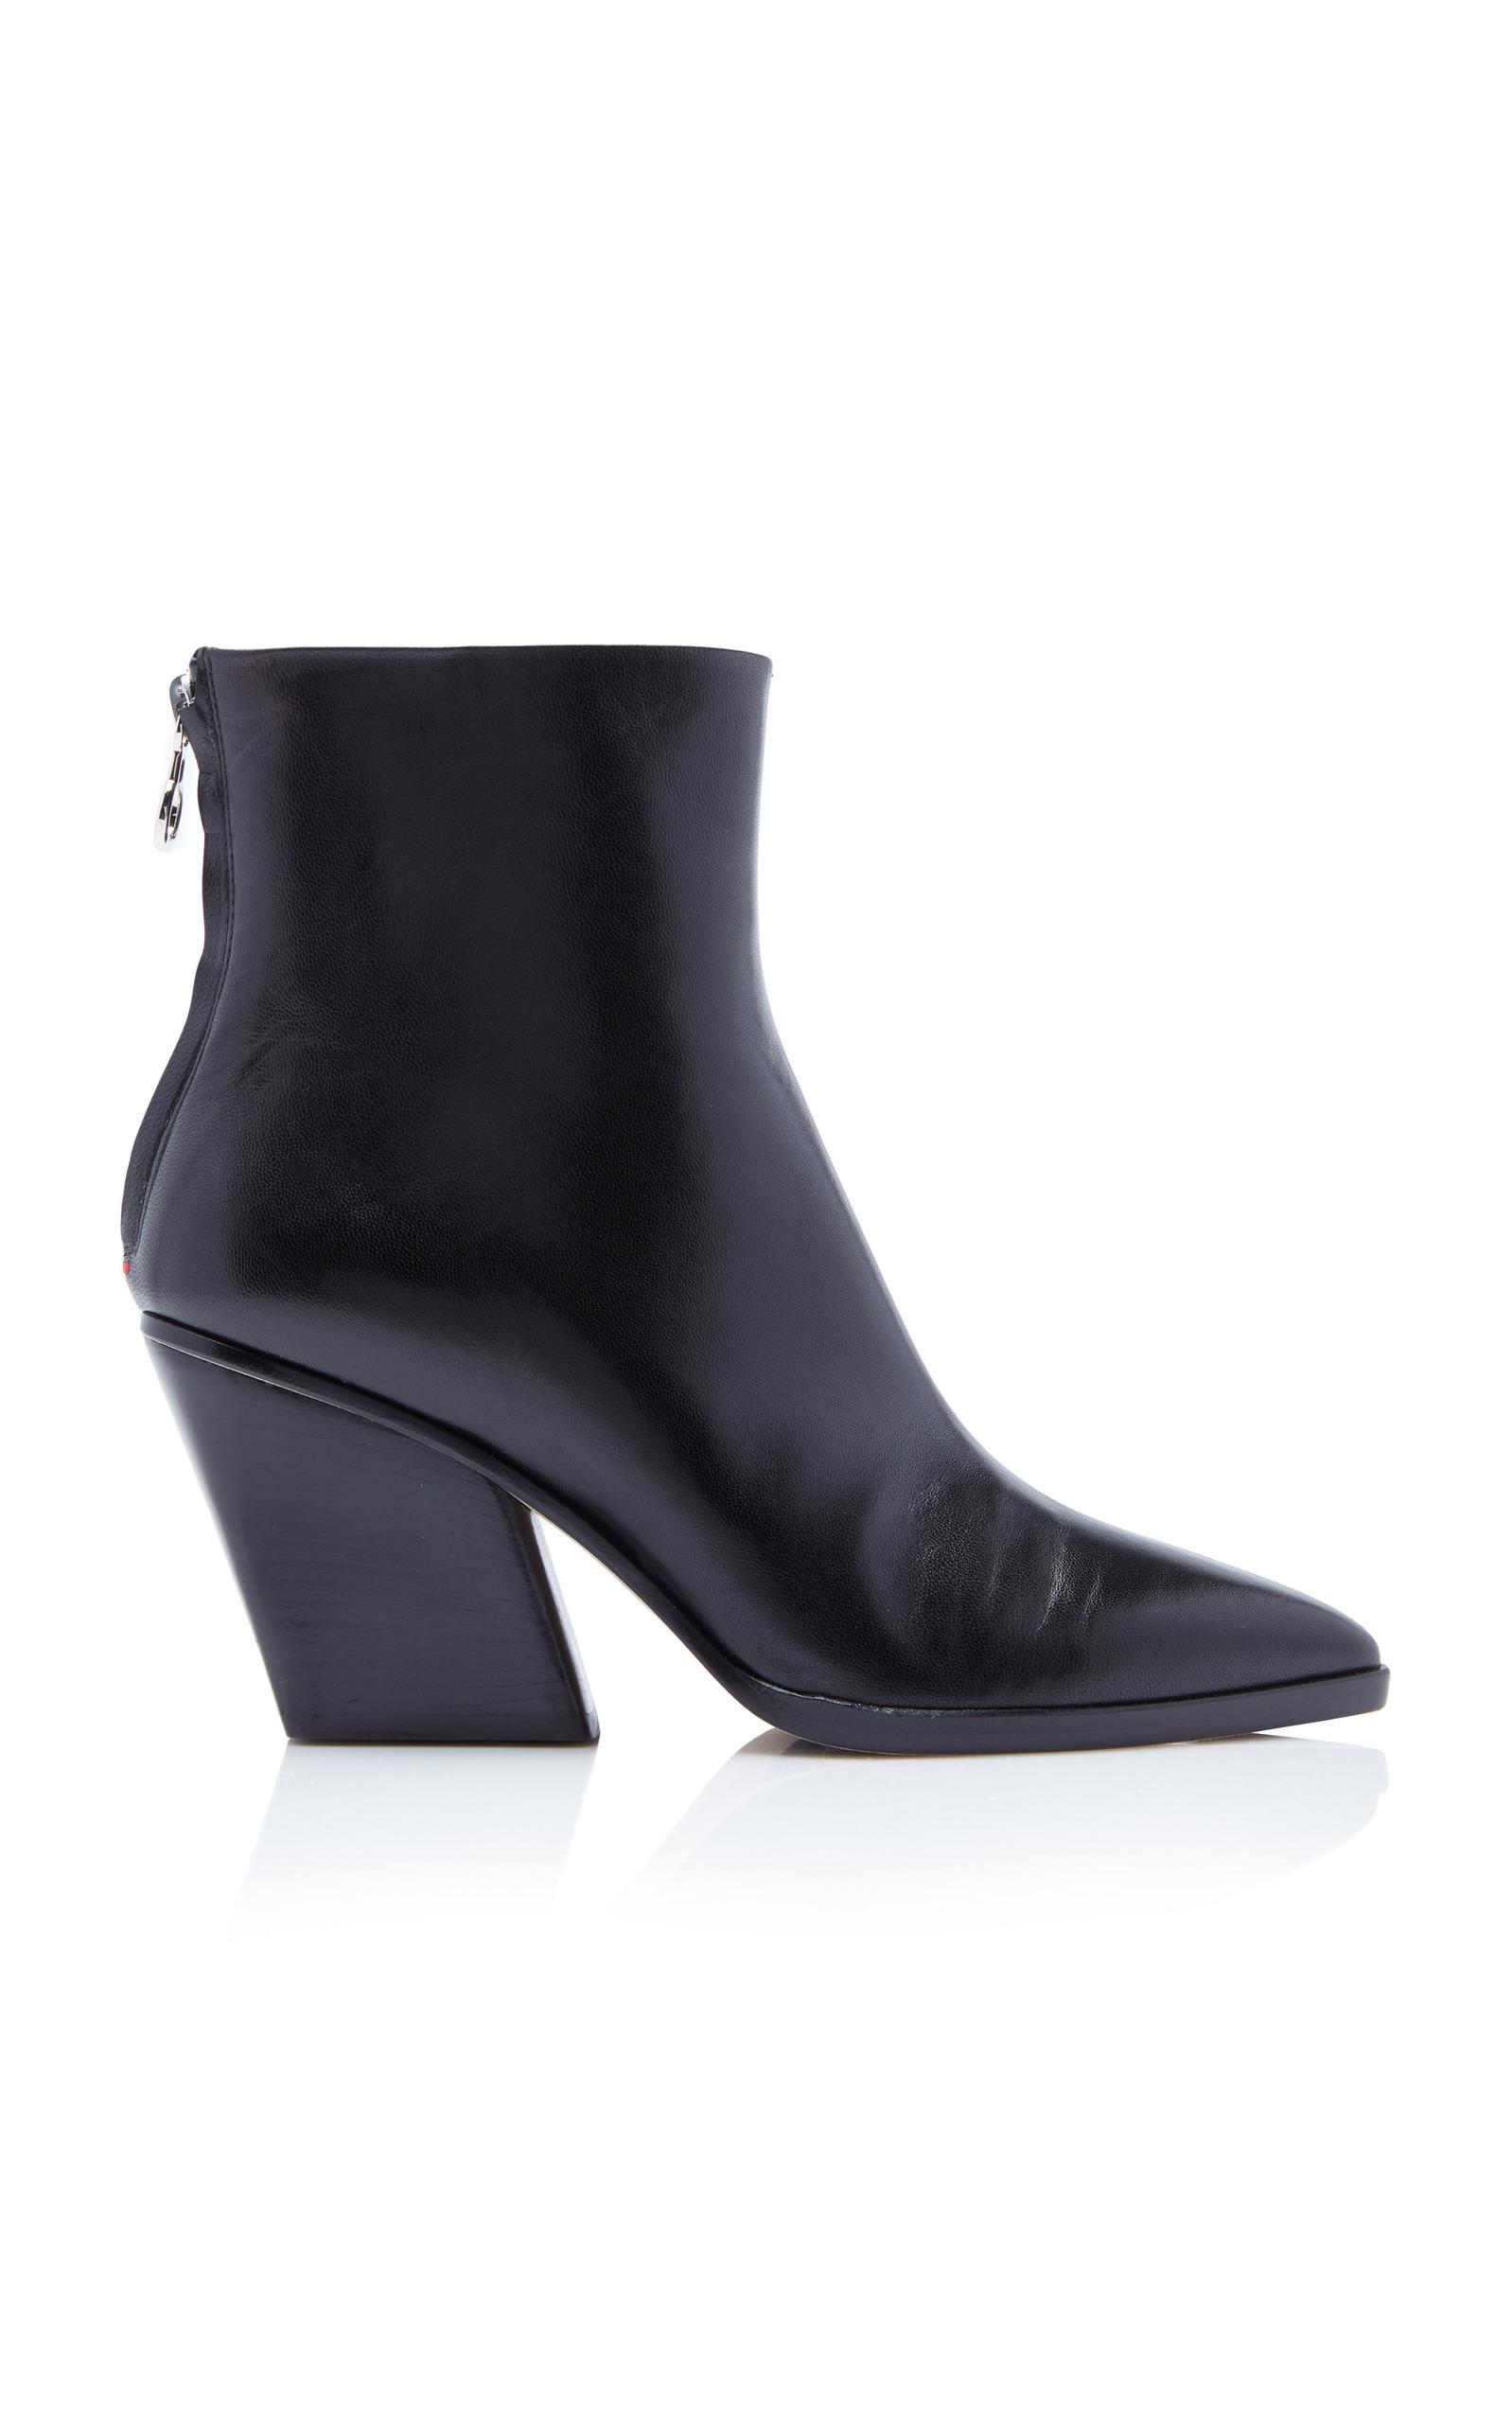 Aeyde Leather Cherry Ankle Boots in Black - Lyst